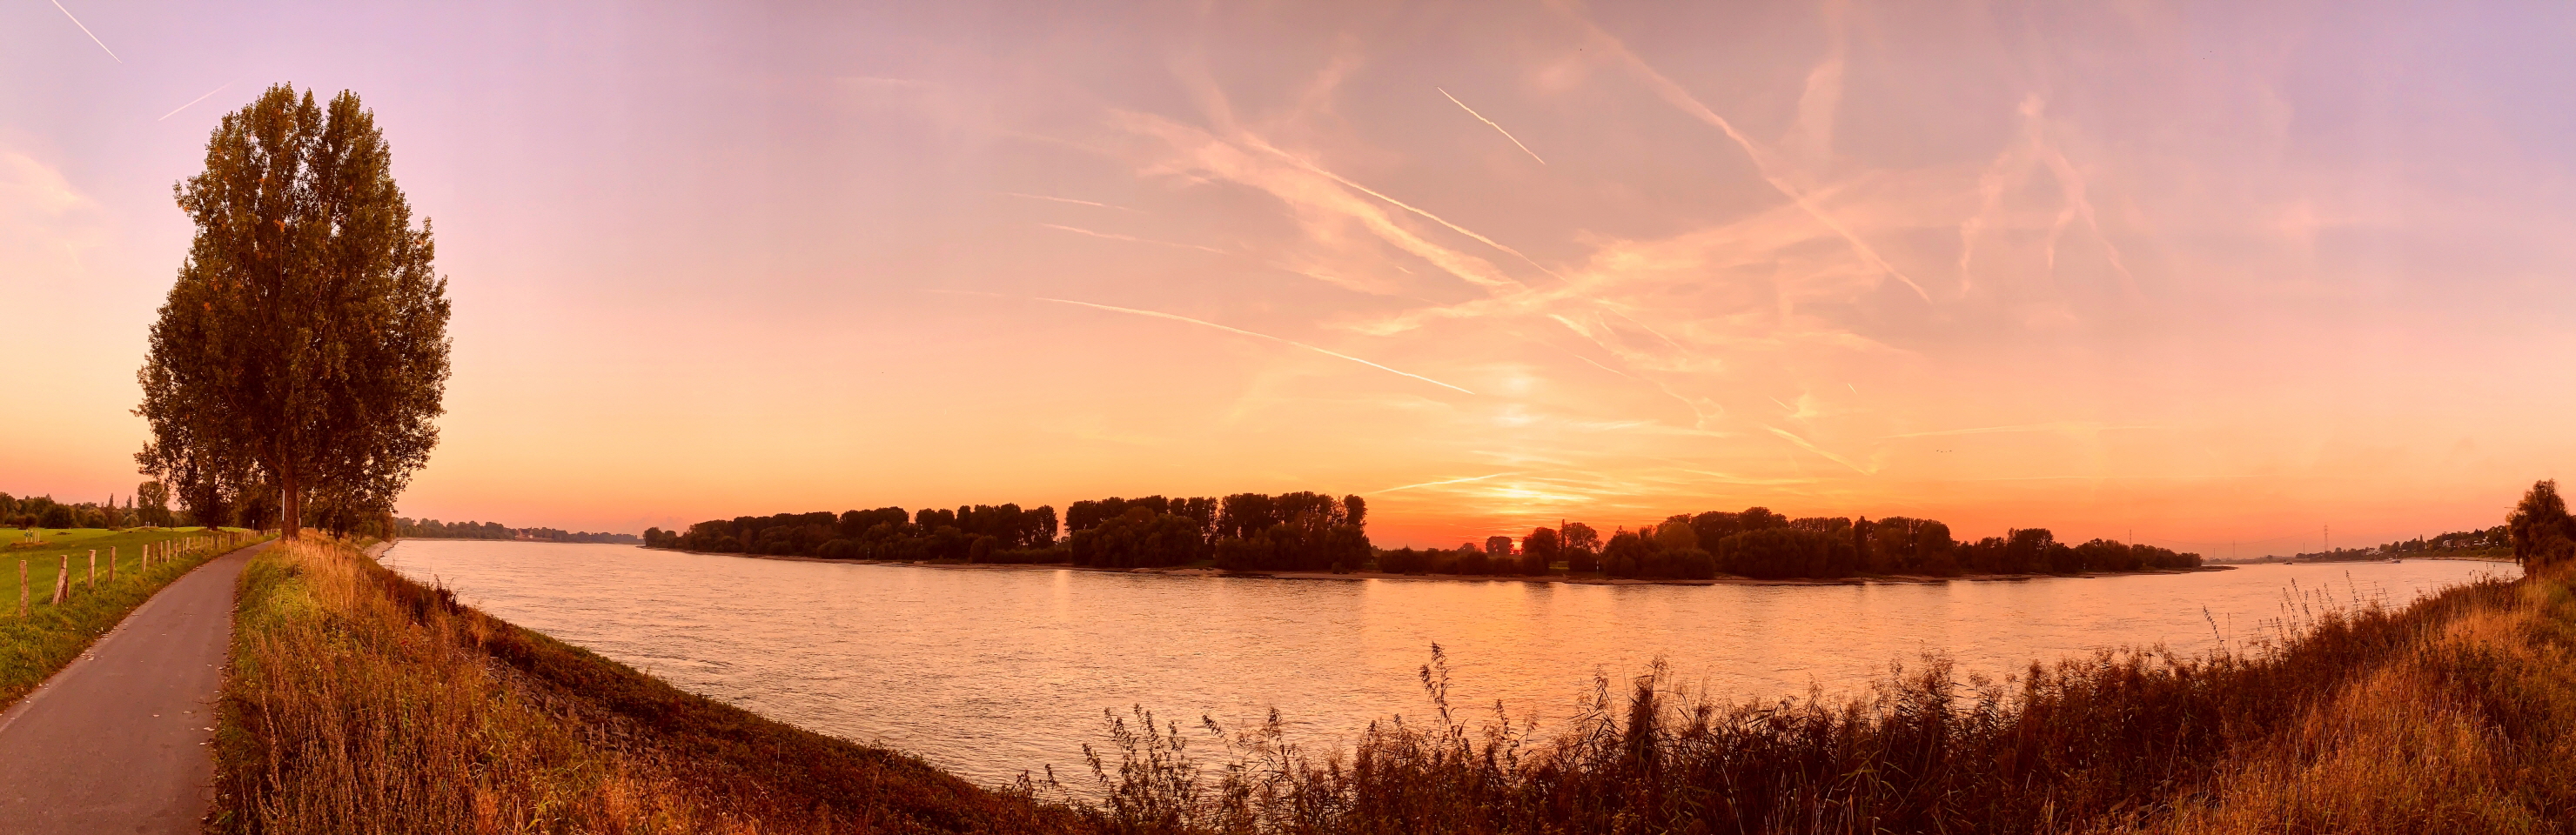 Panorama-2960x960_Sunset at the Rhine Meadows, Wittlaer, Panoramic View